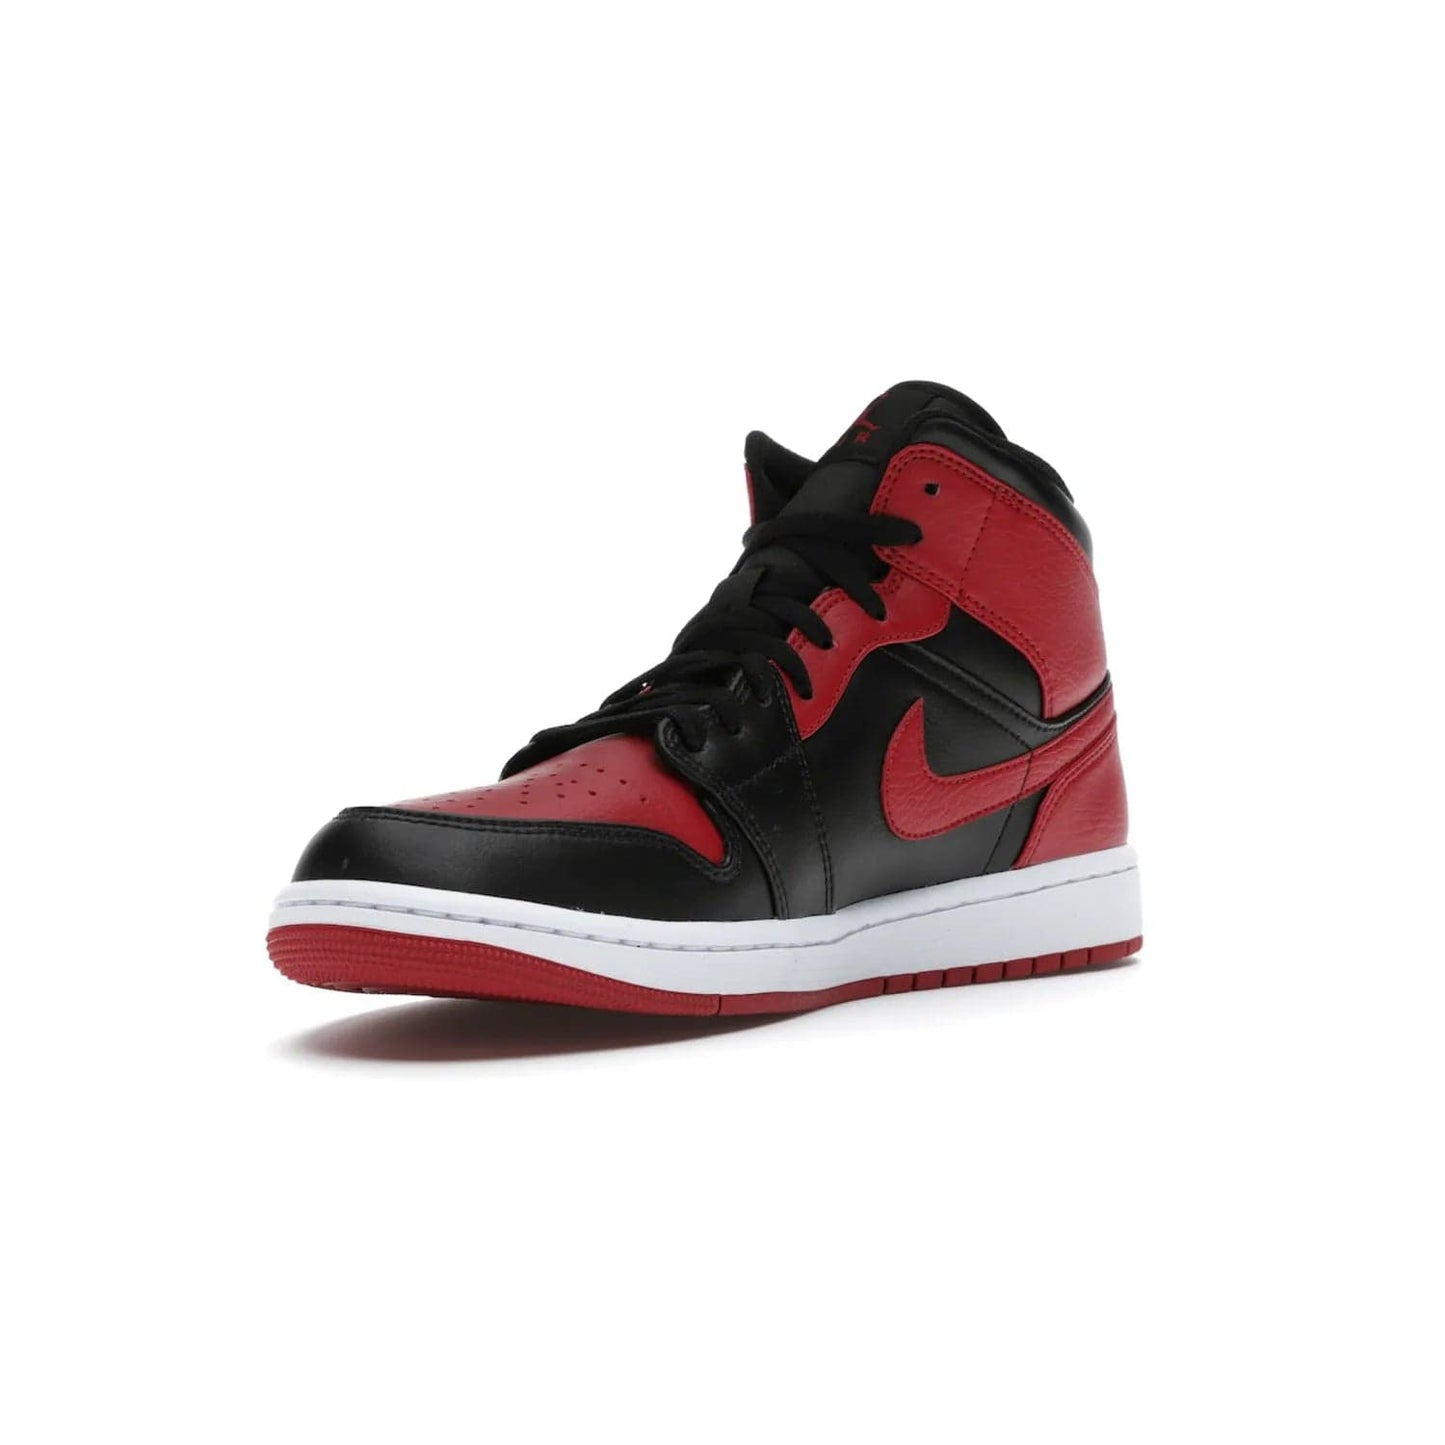 Jordan 1 Mid Banned (2020) - Image 14 - Only at www.BallersClubKickz.com - The Air Jordan 1 Mid Banned (2020) brings a modern twist to the classic Banned colorway. Features full-grain black and red leather uppers, red leather around the toe, collar, heel, & Swoosh. Release November 2021 for $110.